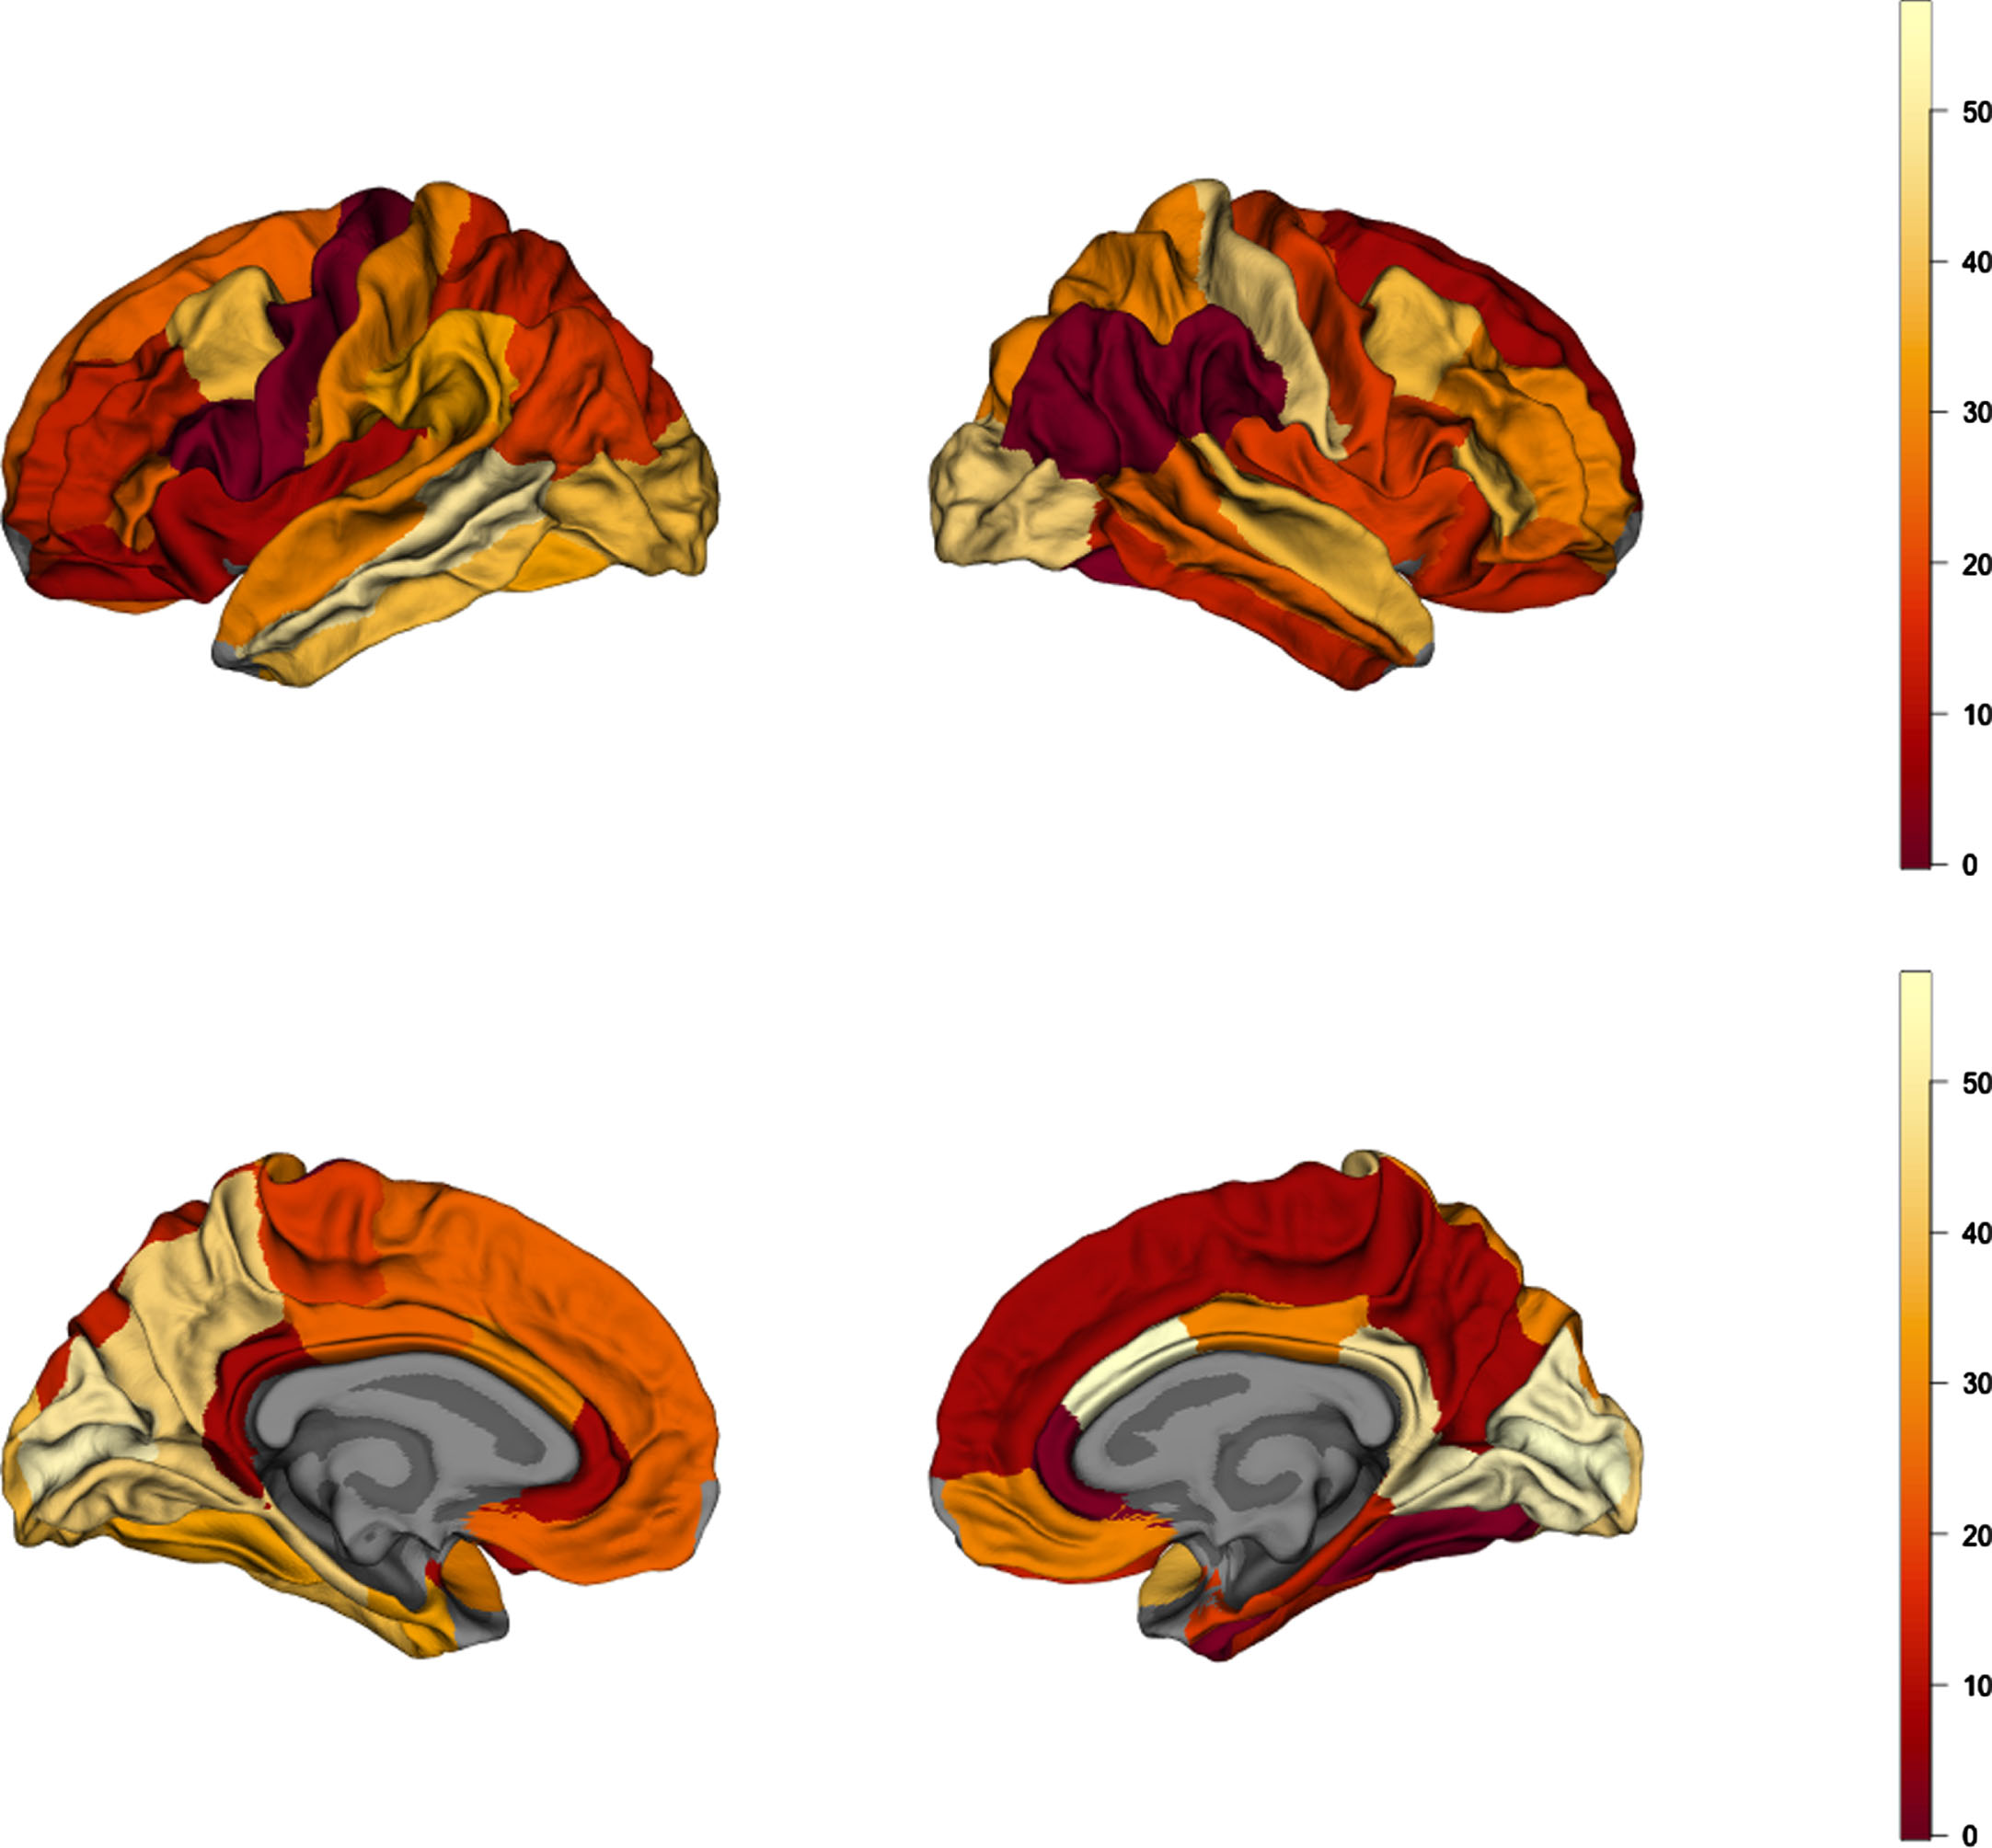 Brain map of absolute values of rank differences between AD and obesity cortical-thickness maps. Lower values represent higher rank similarity of the parcels, depicting regions of highest similarity between AD and obesity.